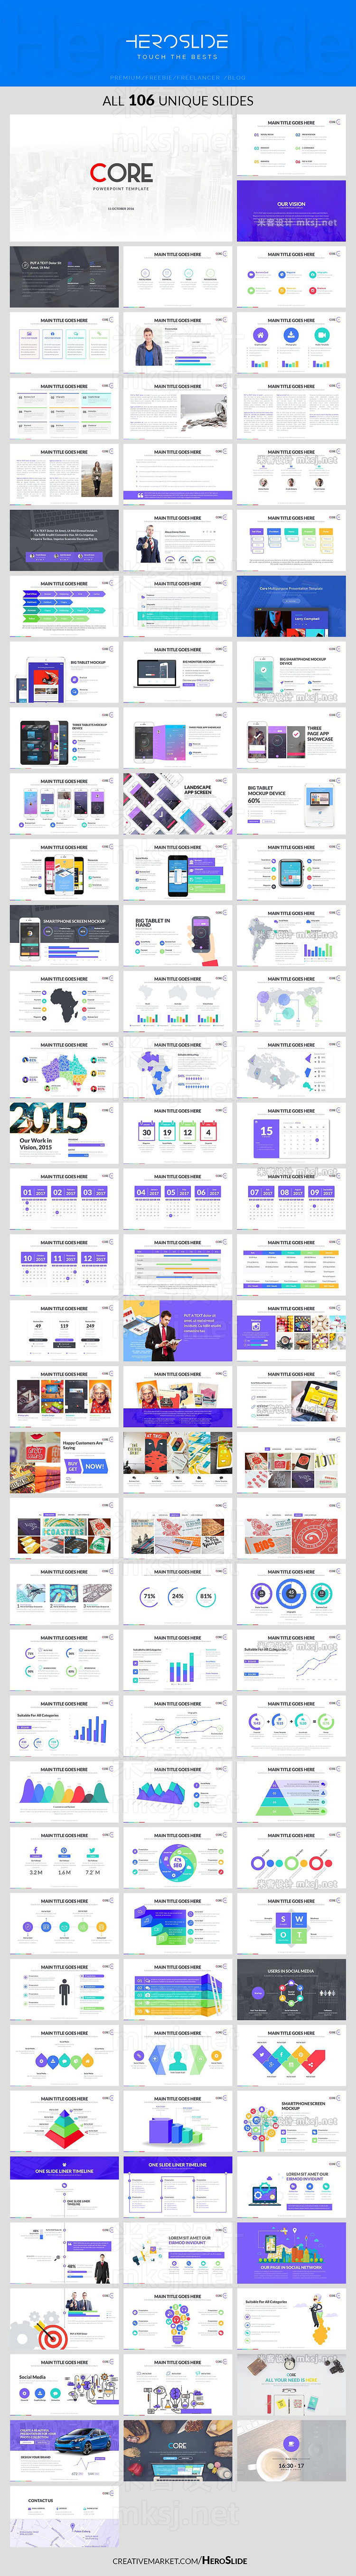 PPT模板 Core Business Powerpoint Template